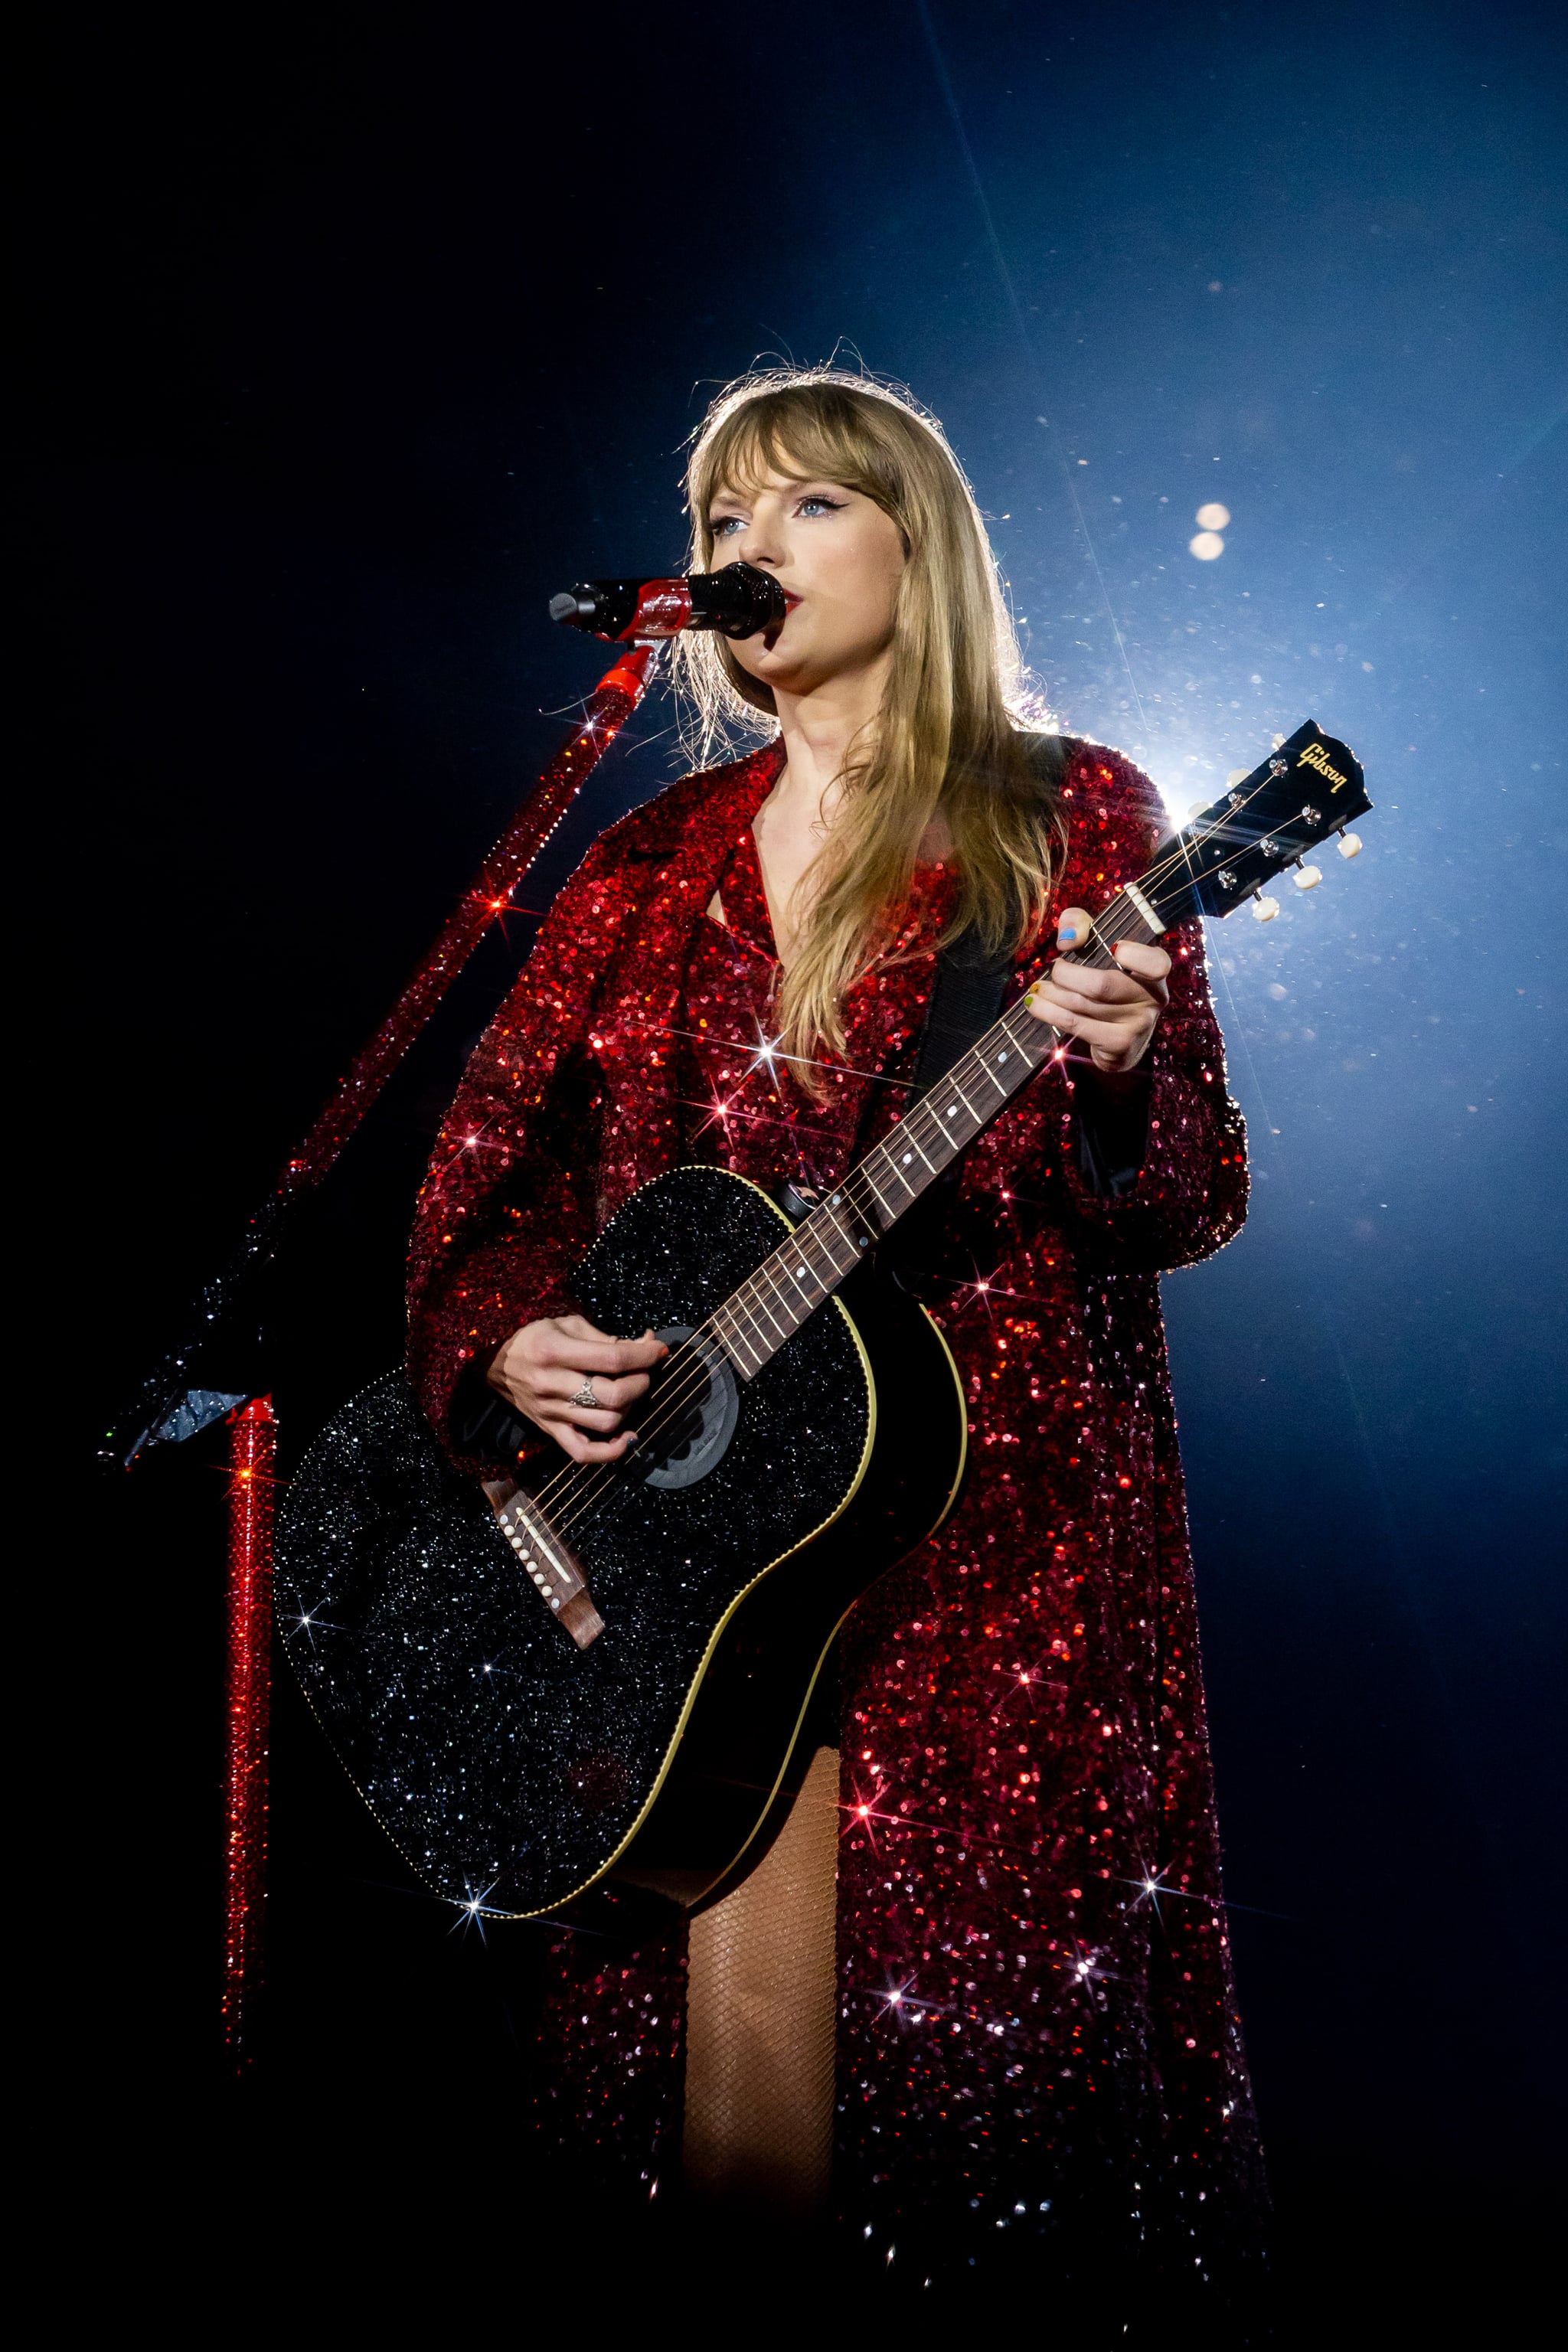 ATLANTA, GEORGIA - APRIL 28: FOR EDITORIAL USE ONLY. Taylor Swift performs onstage during The Eras Tour at Mercedes-Benz Stadium on April 28, 2023 in Atlanta, Georgia. (Photo by Terence Rushin/TAS23/Getty Images for TAS Rights Management)